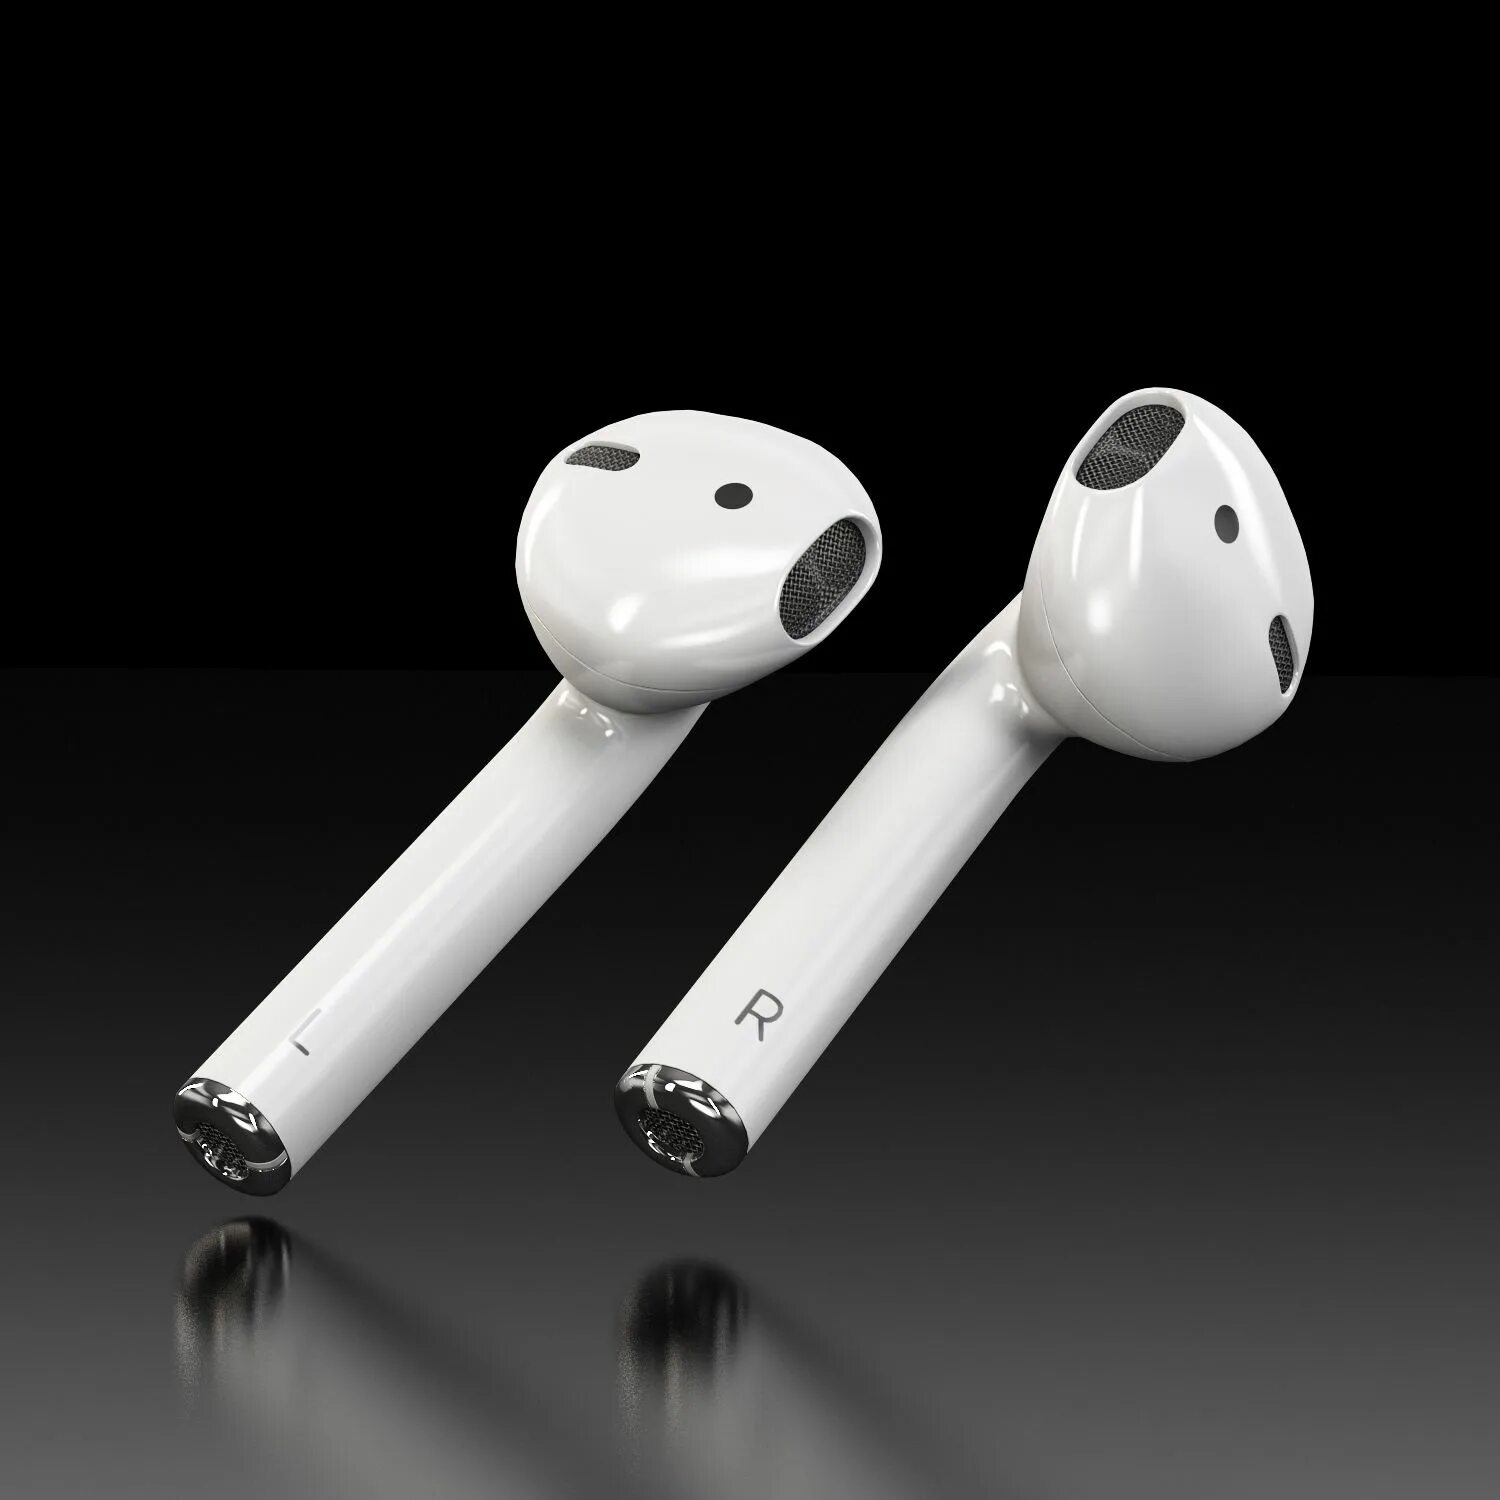 Airpods pro huilian. Айрподсы 3. AIRPODS Pro 3. Apple Earpods 3 Pro. AIRPODS Max 3d model.